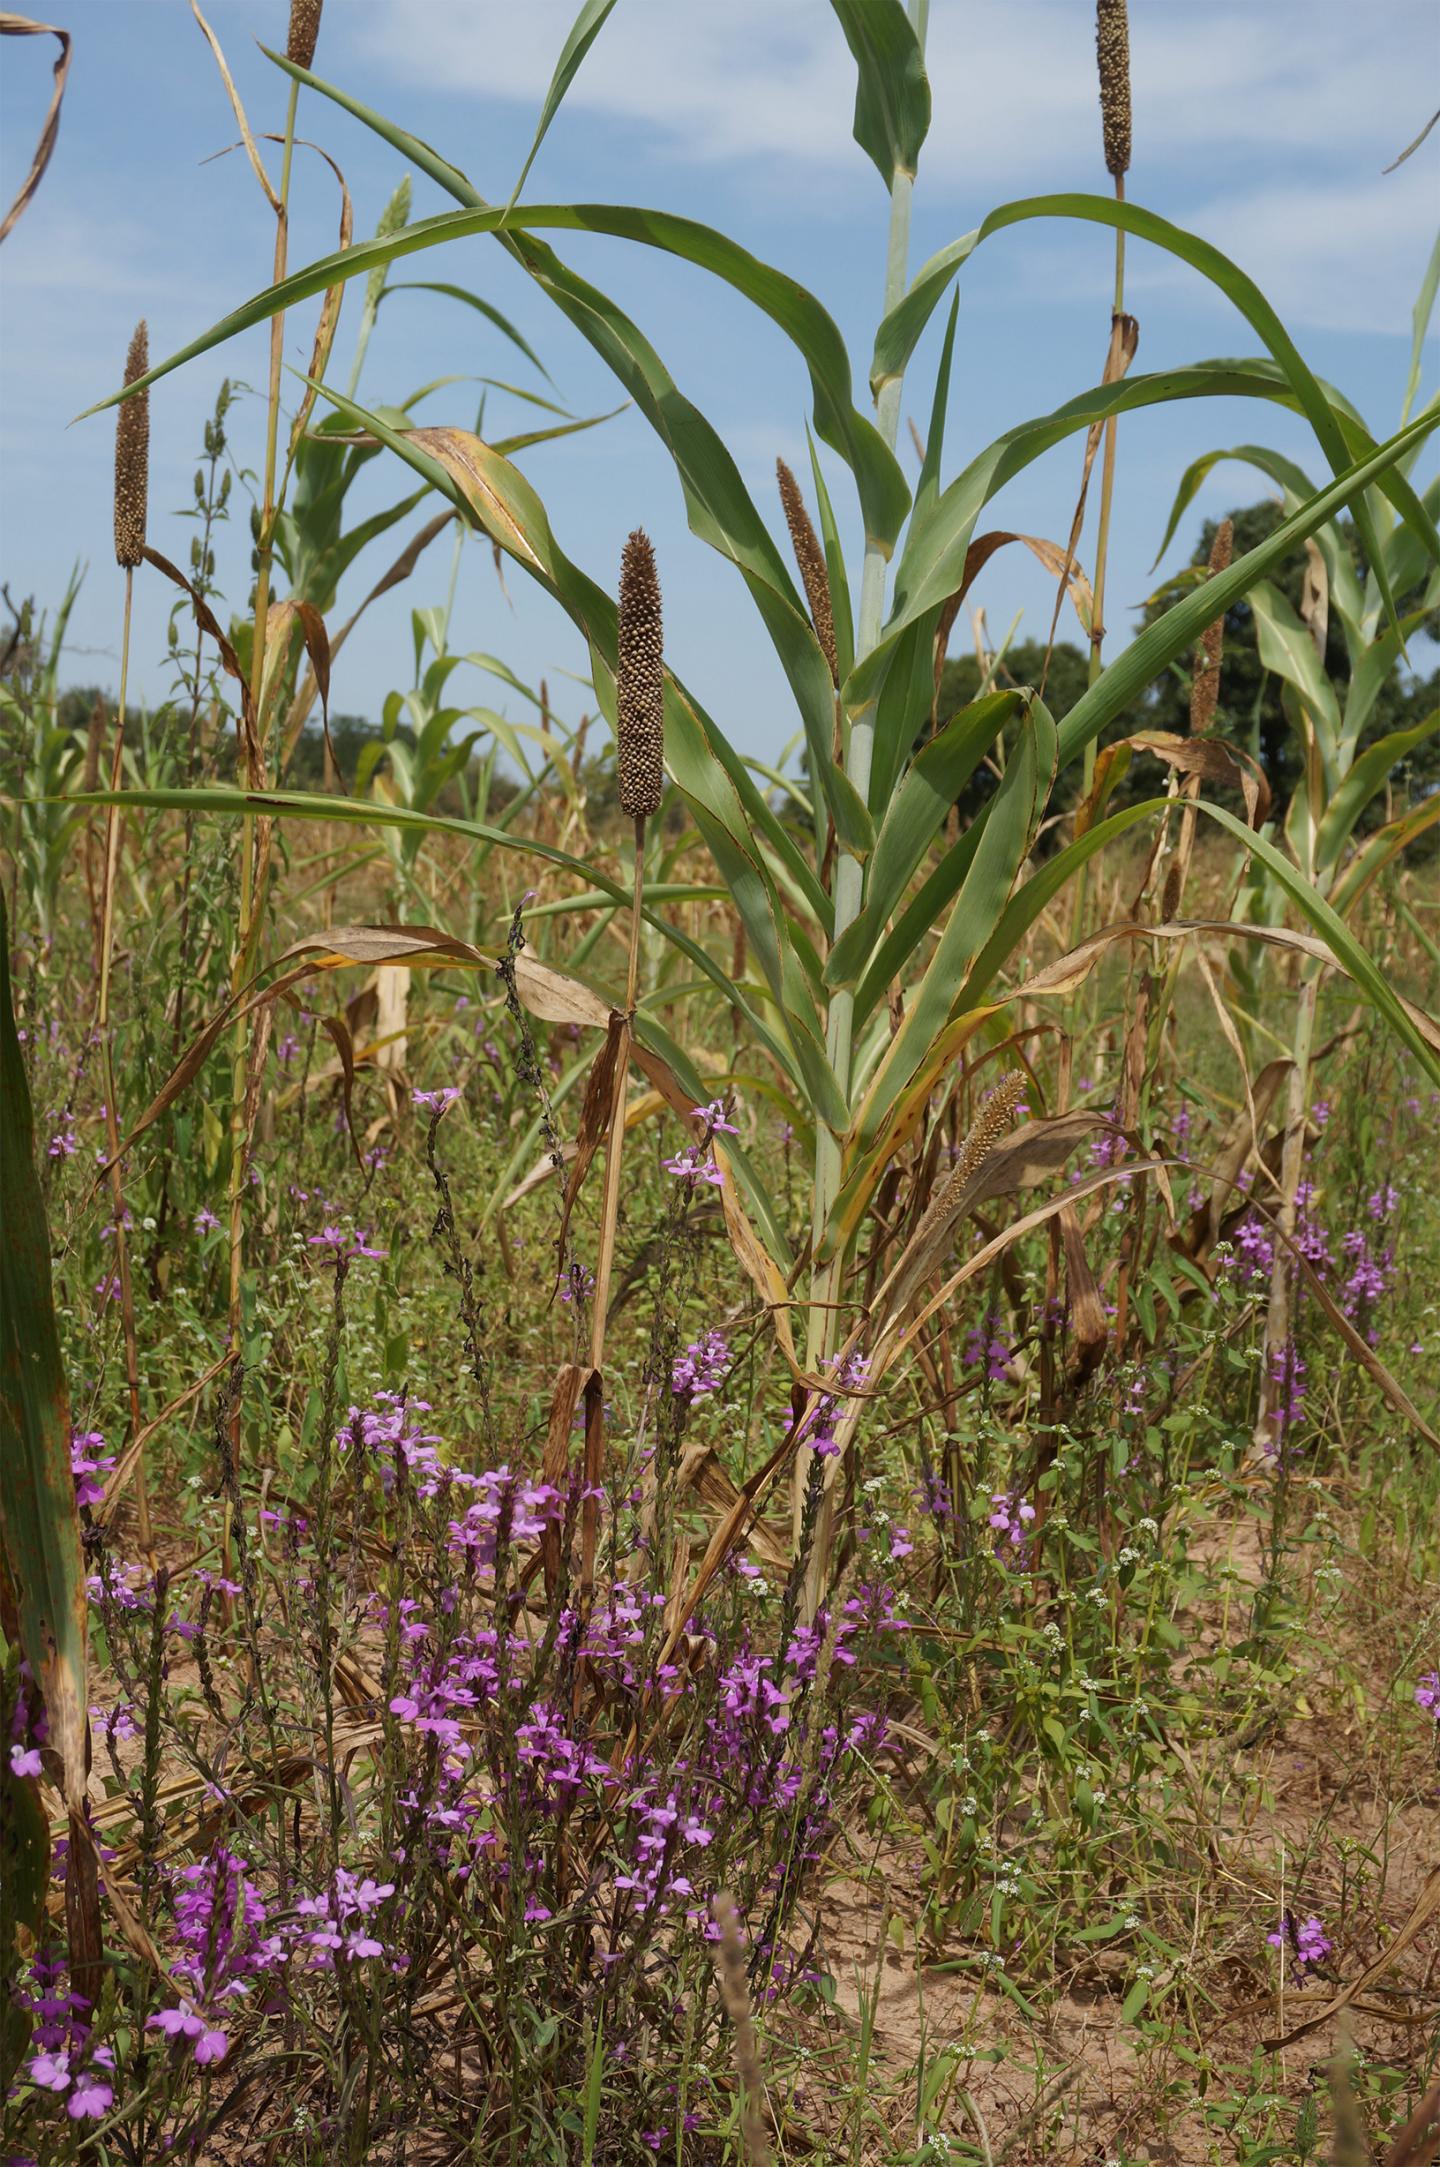 A Pearl Millet Field Infested with <em>Striga hermonthica</em>